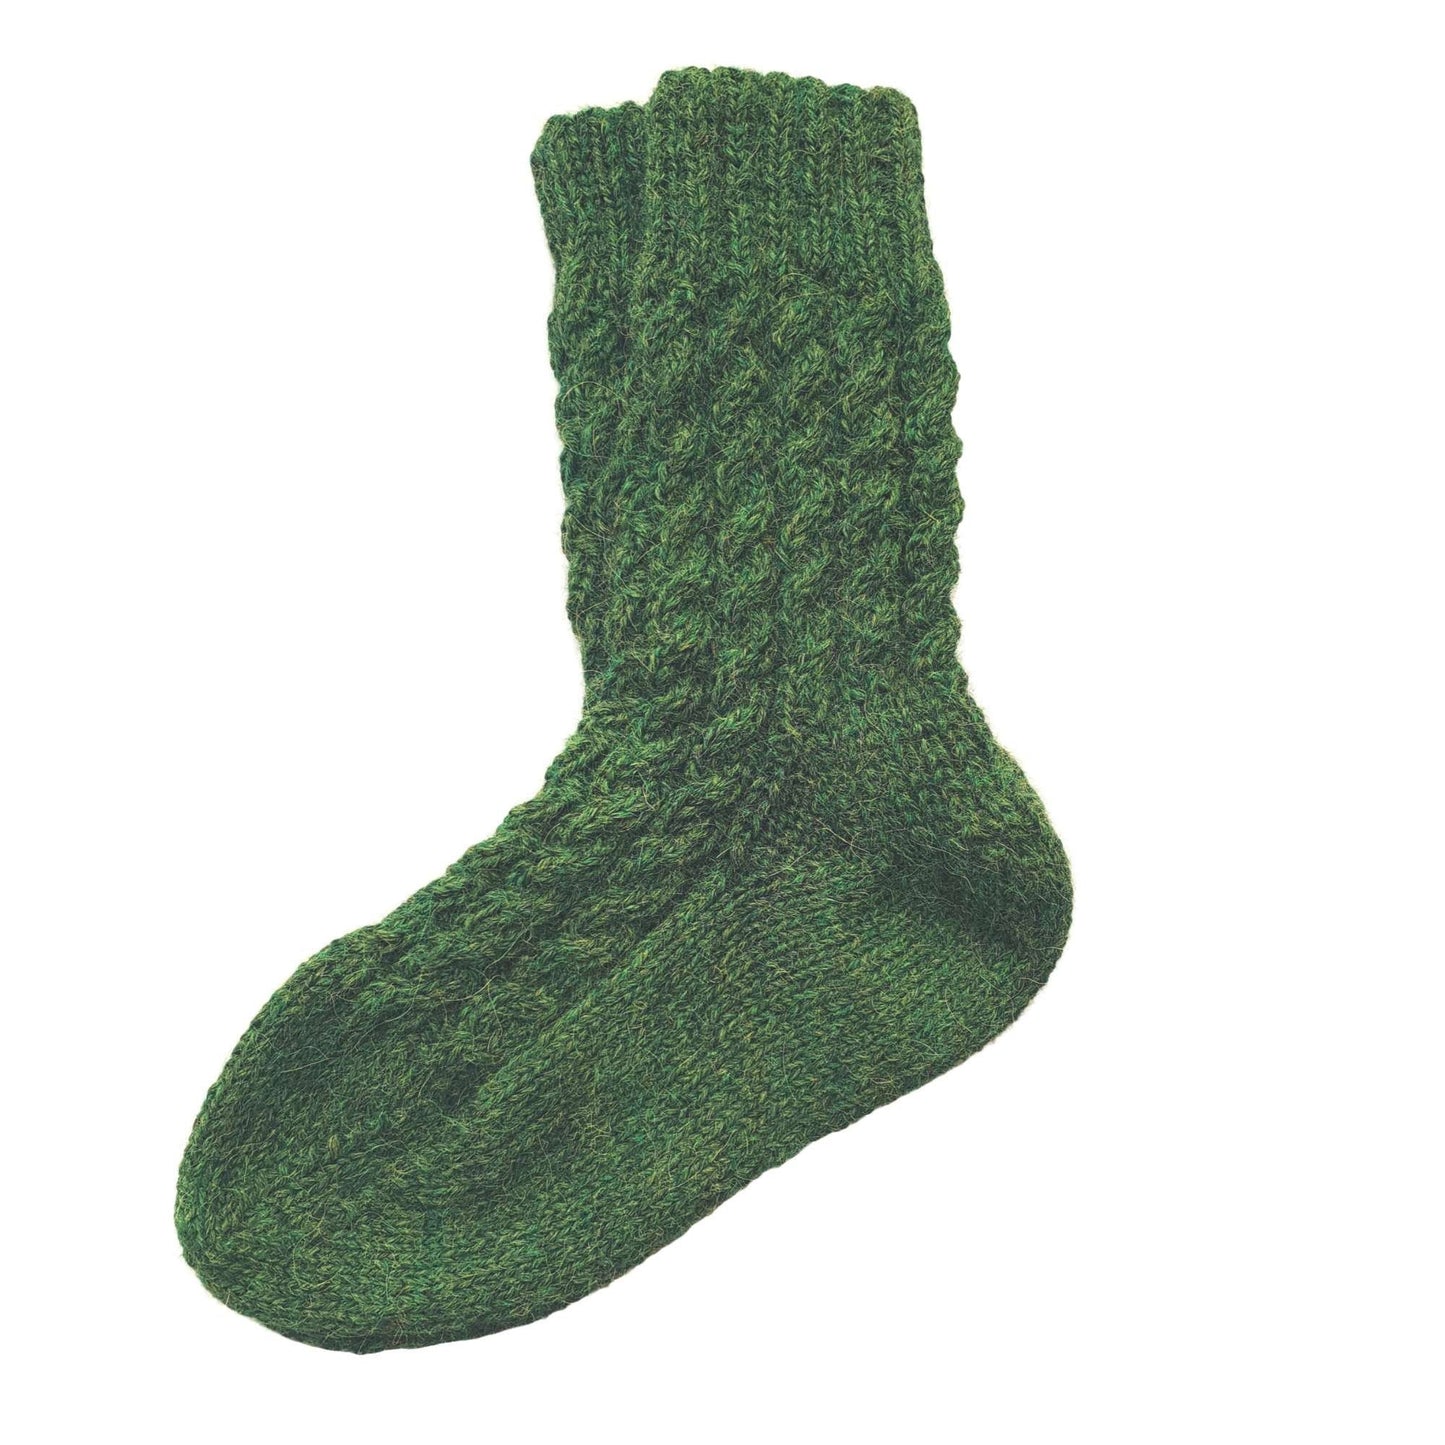 Alpaca Socks Knit Wool, Hand Knitted, 100% Alpaca Winter Socks, Cosy, thick chunky knit. Ethical, fair trade and eco friendly. Plastic free